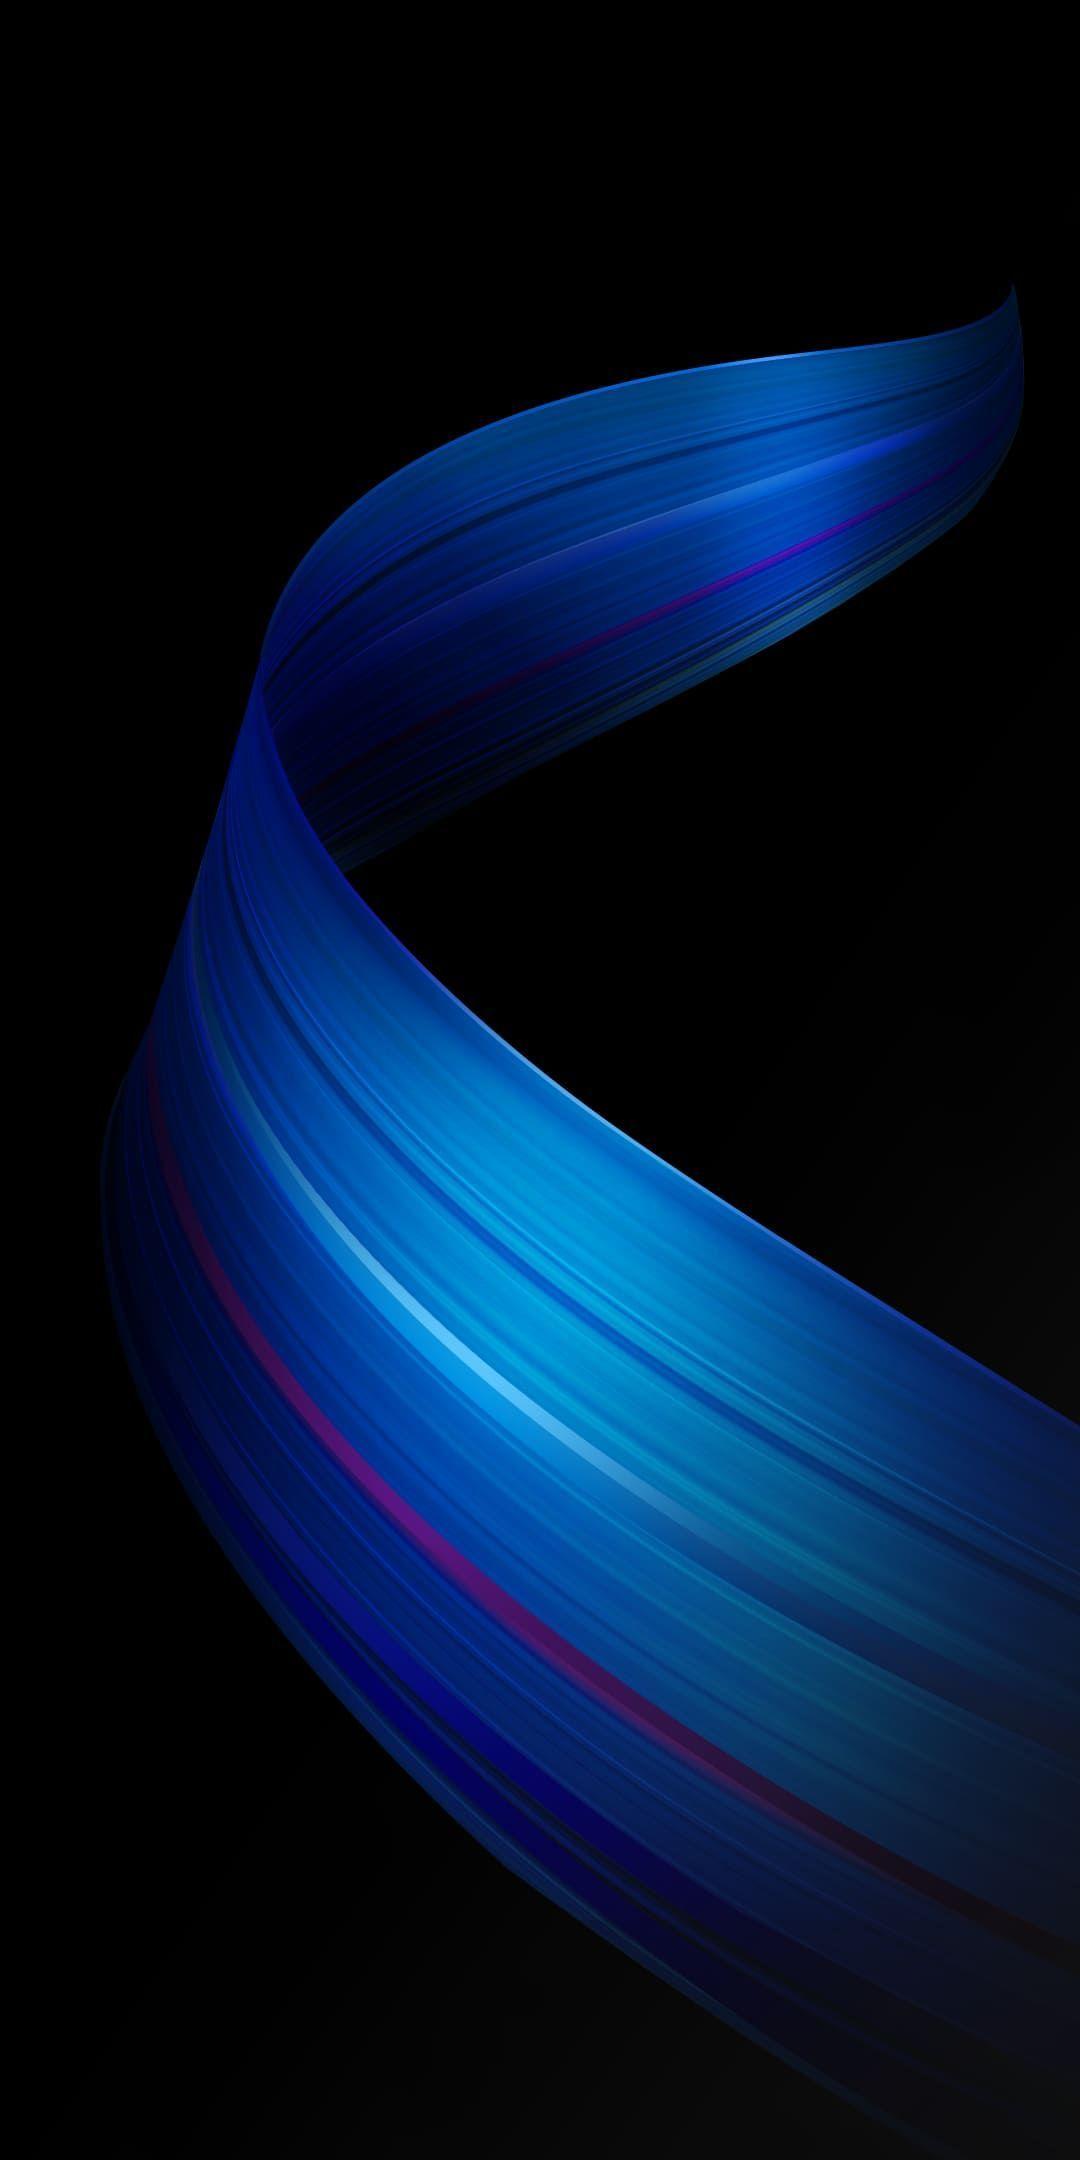 OPPO R7 Stock Wallpapers